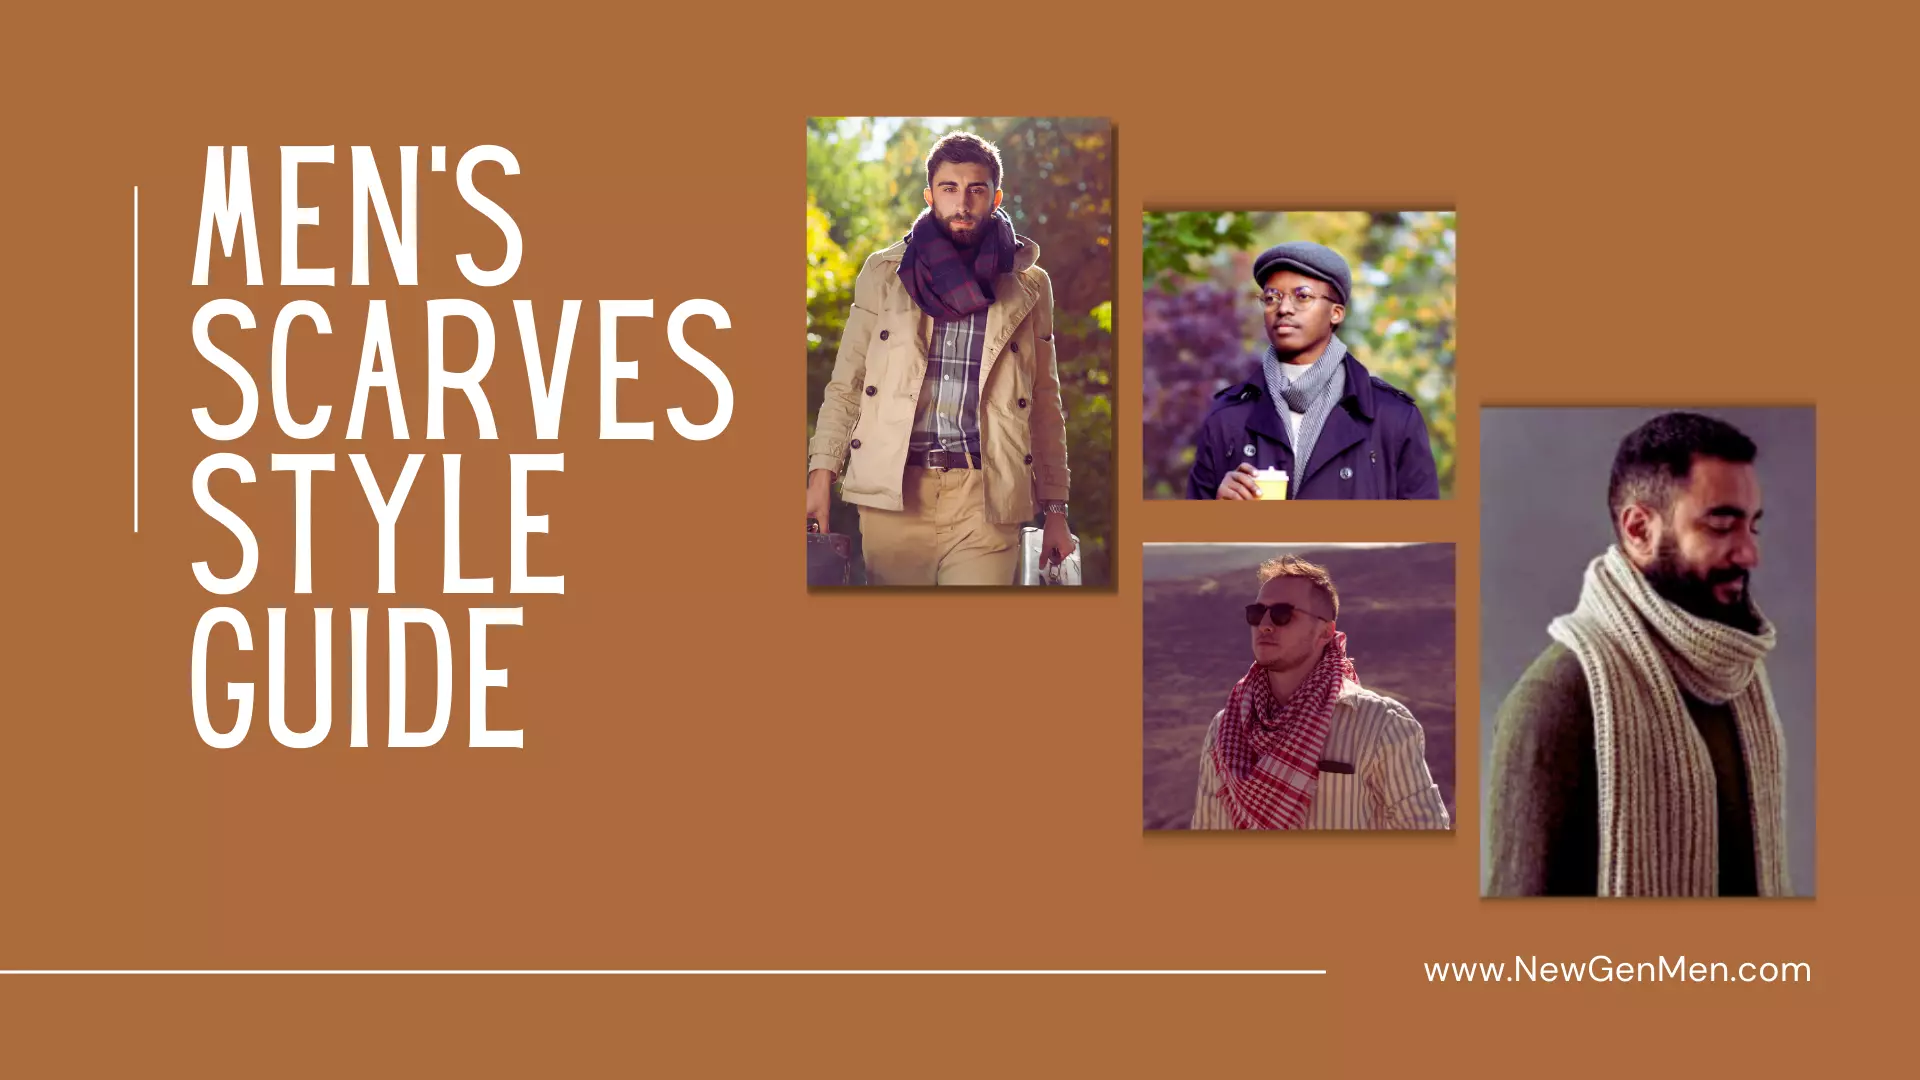 A Guide to Choosing and Styling Men’s Scarves